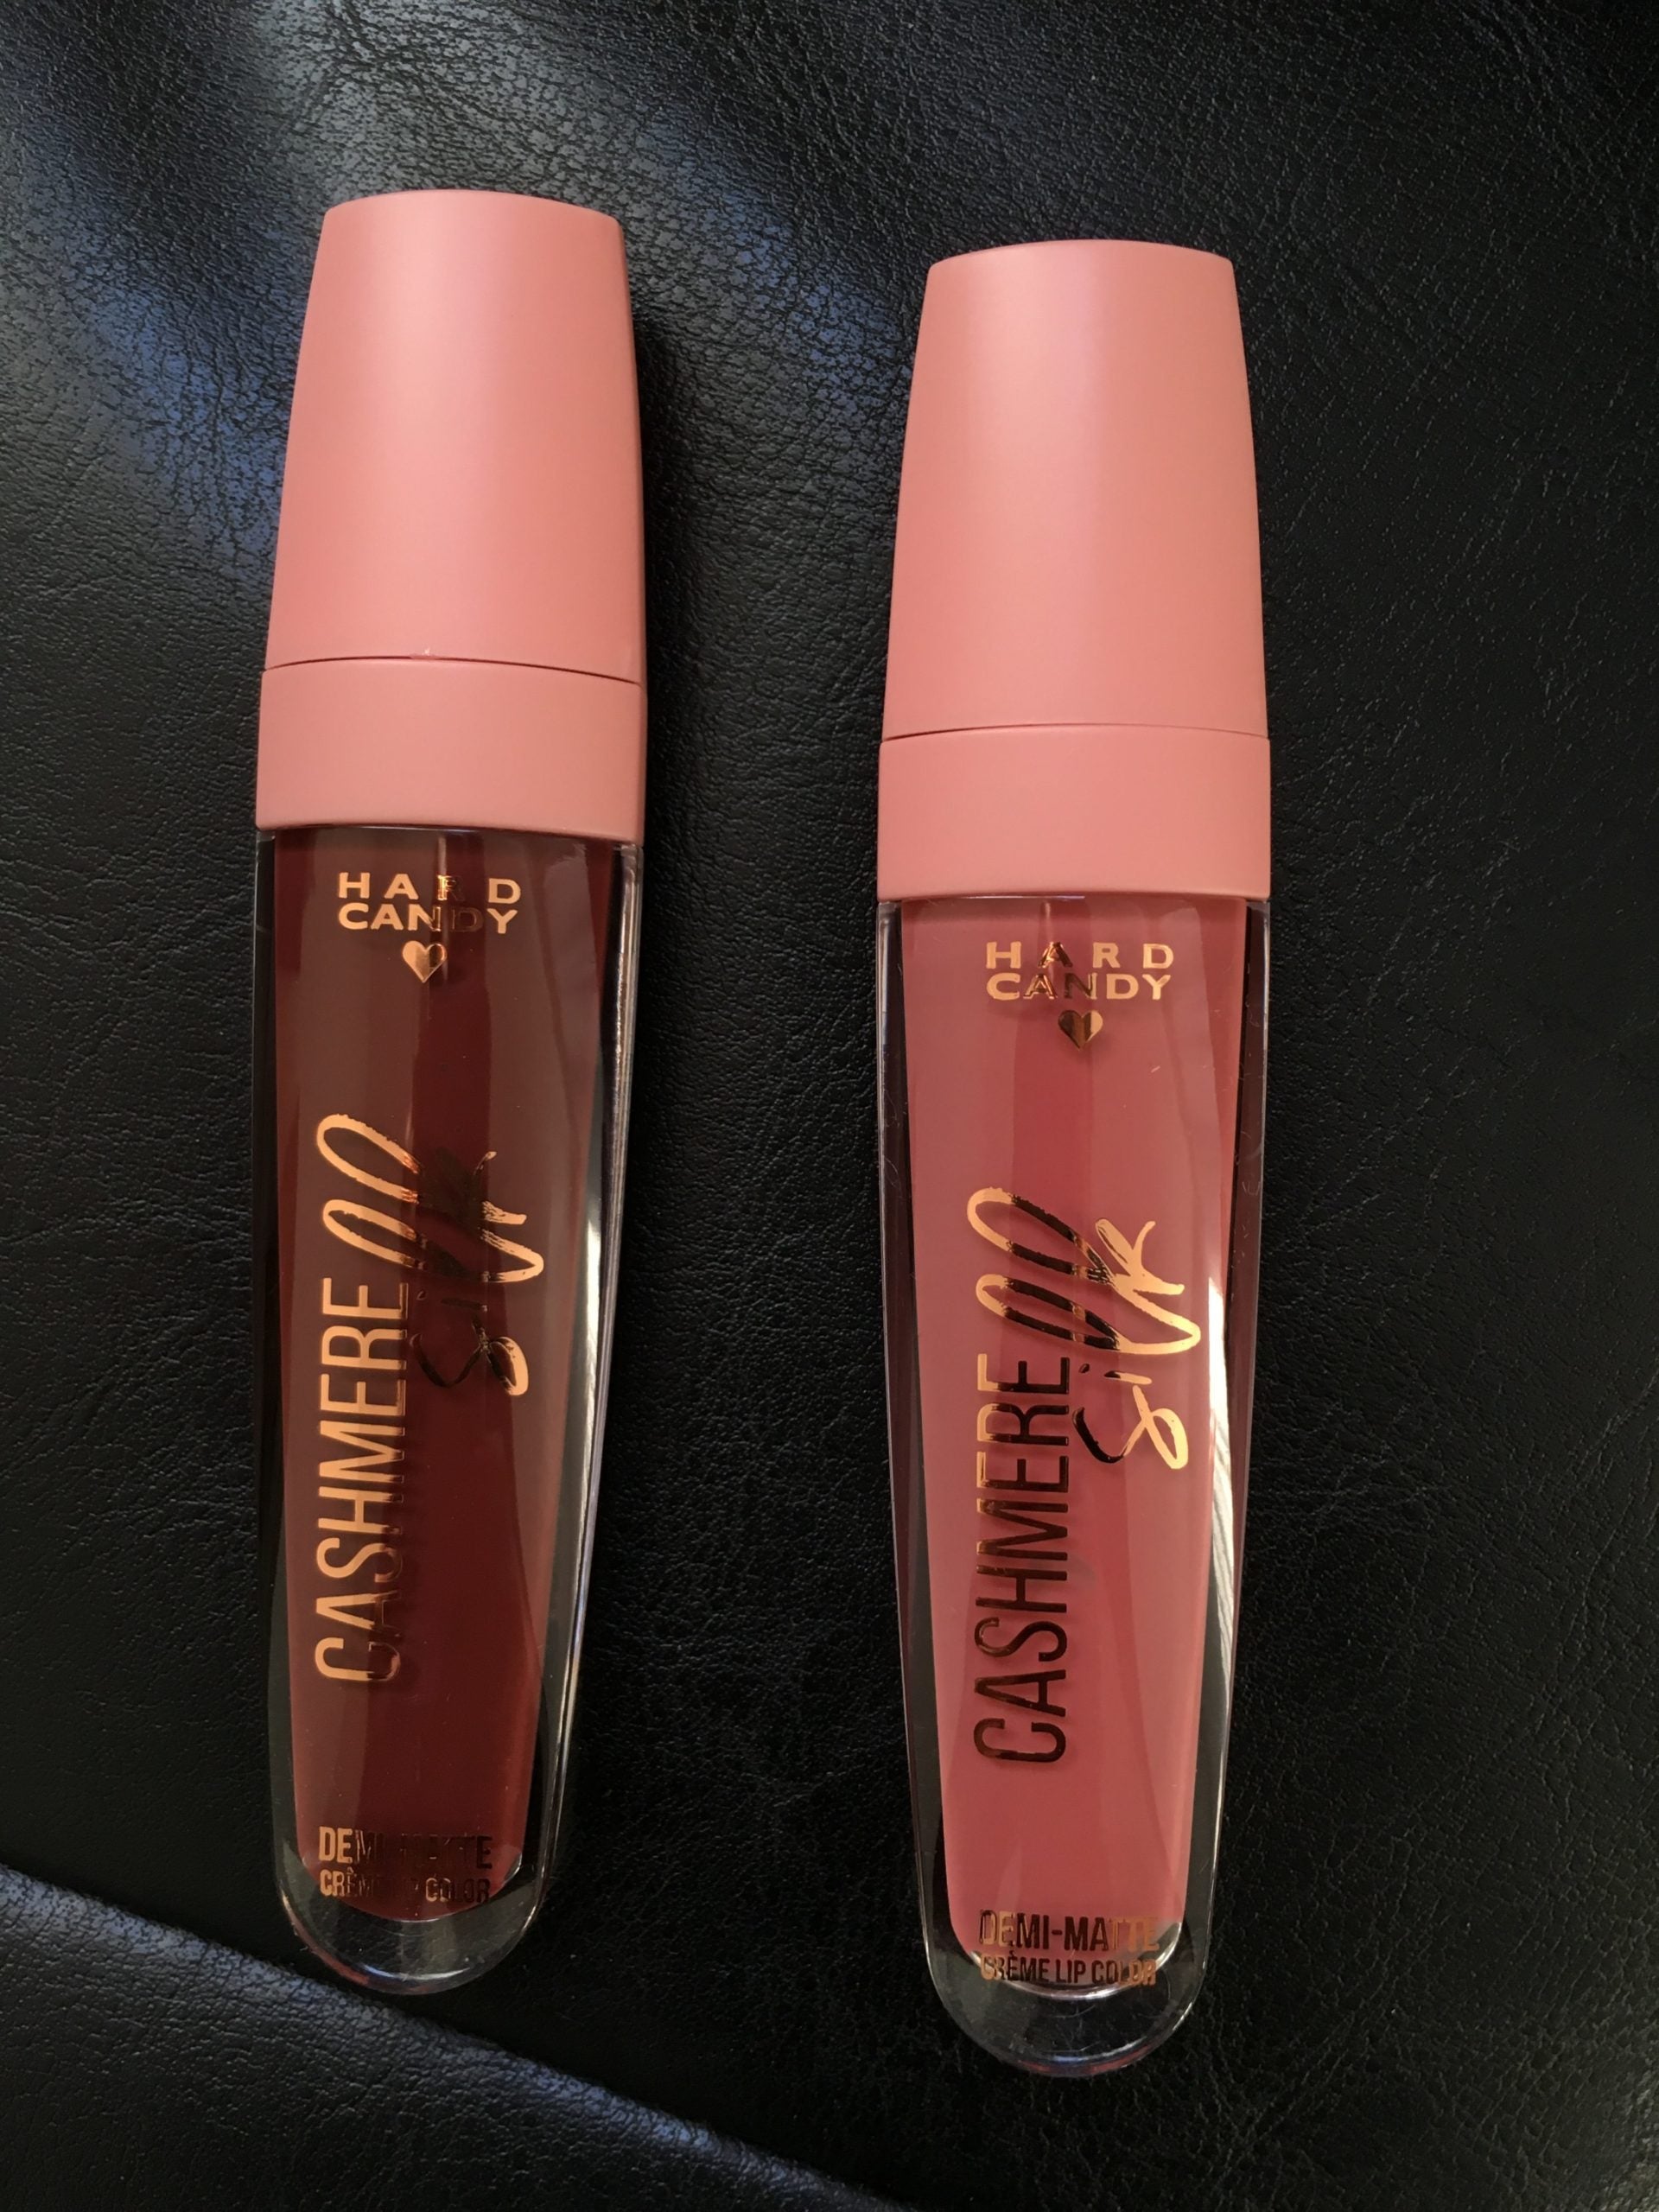 Review, Swatches, Photos, Makeup Trends 2018, 2019, 2020: New Drugstore Lip Products, Hard Candy, Cashmere Silk Lip Glosses